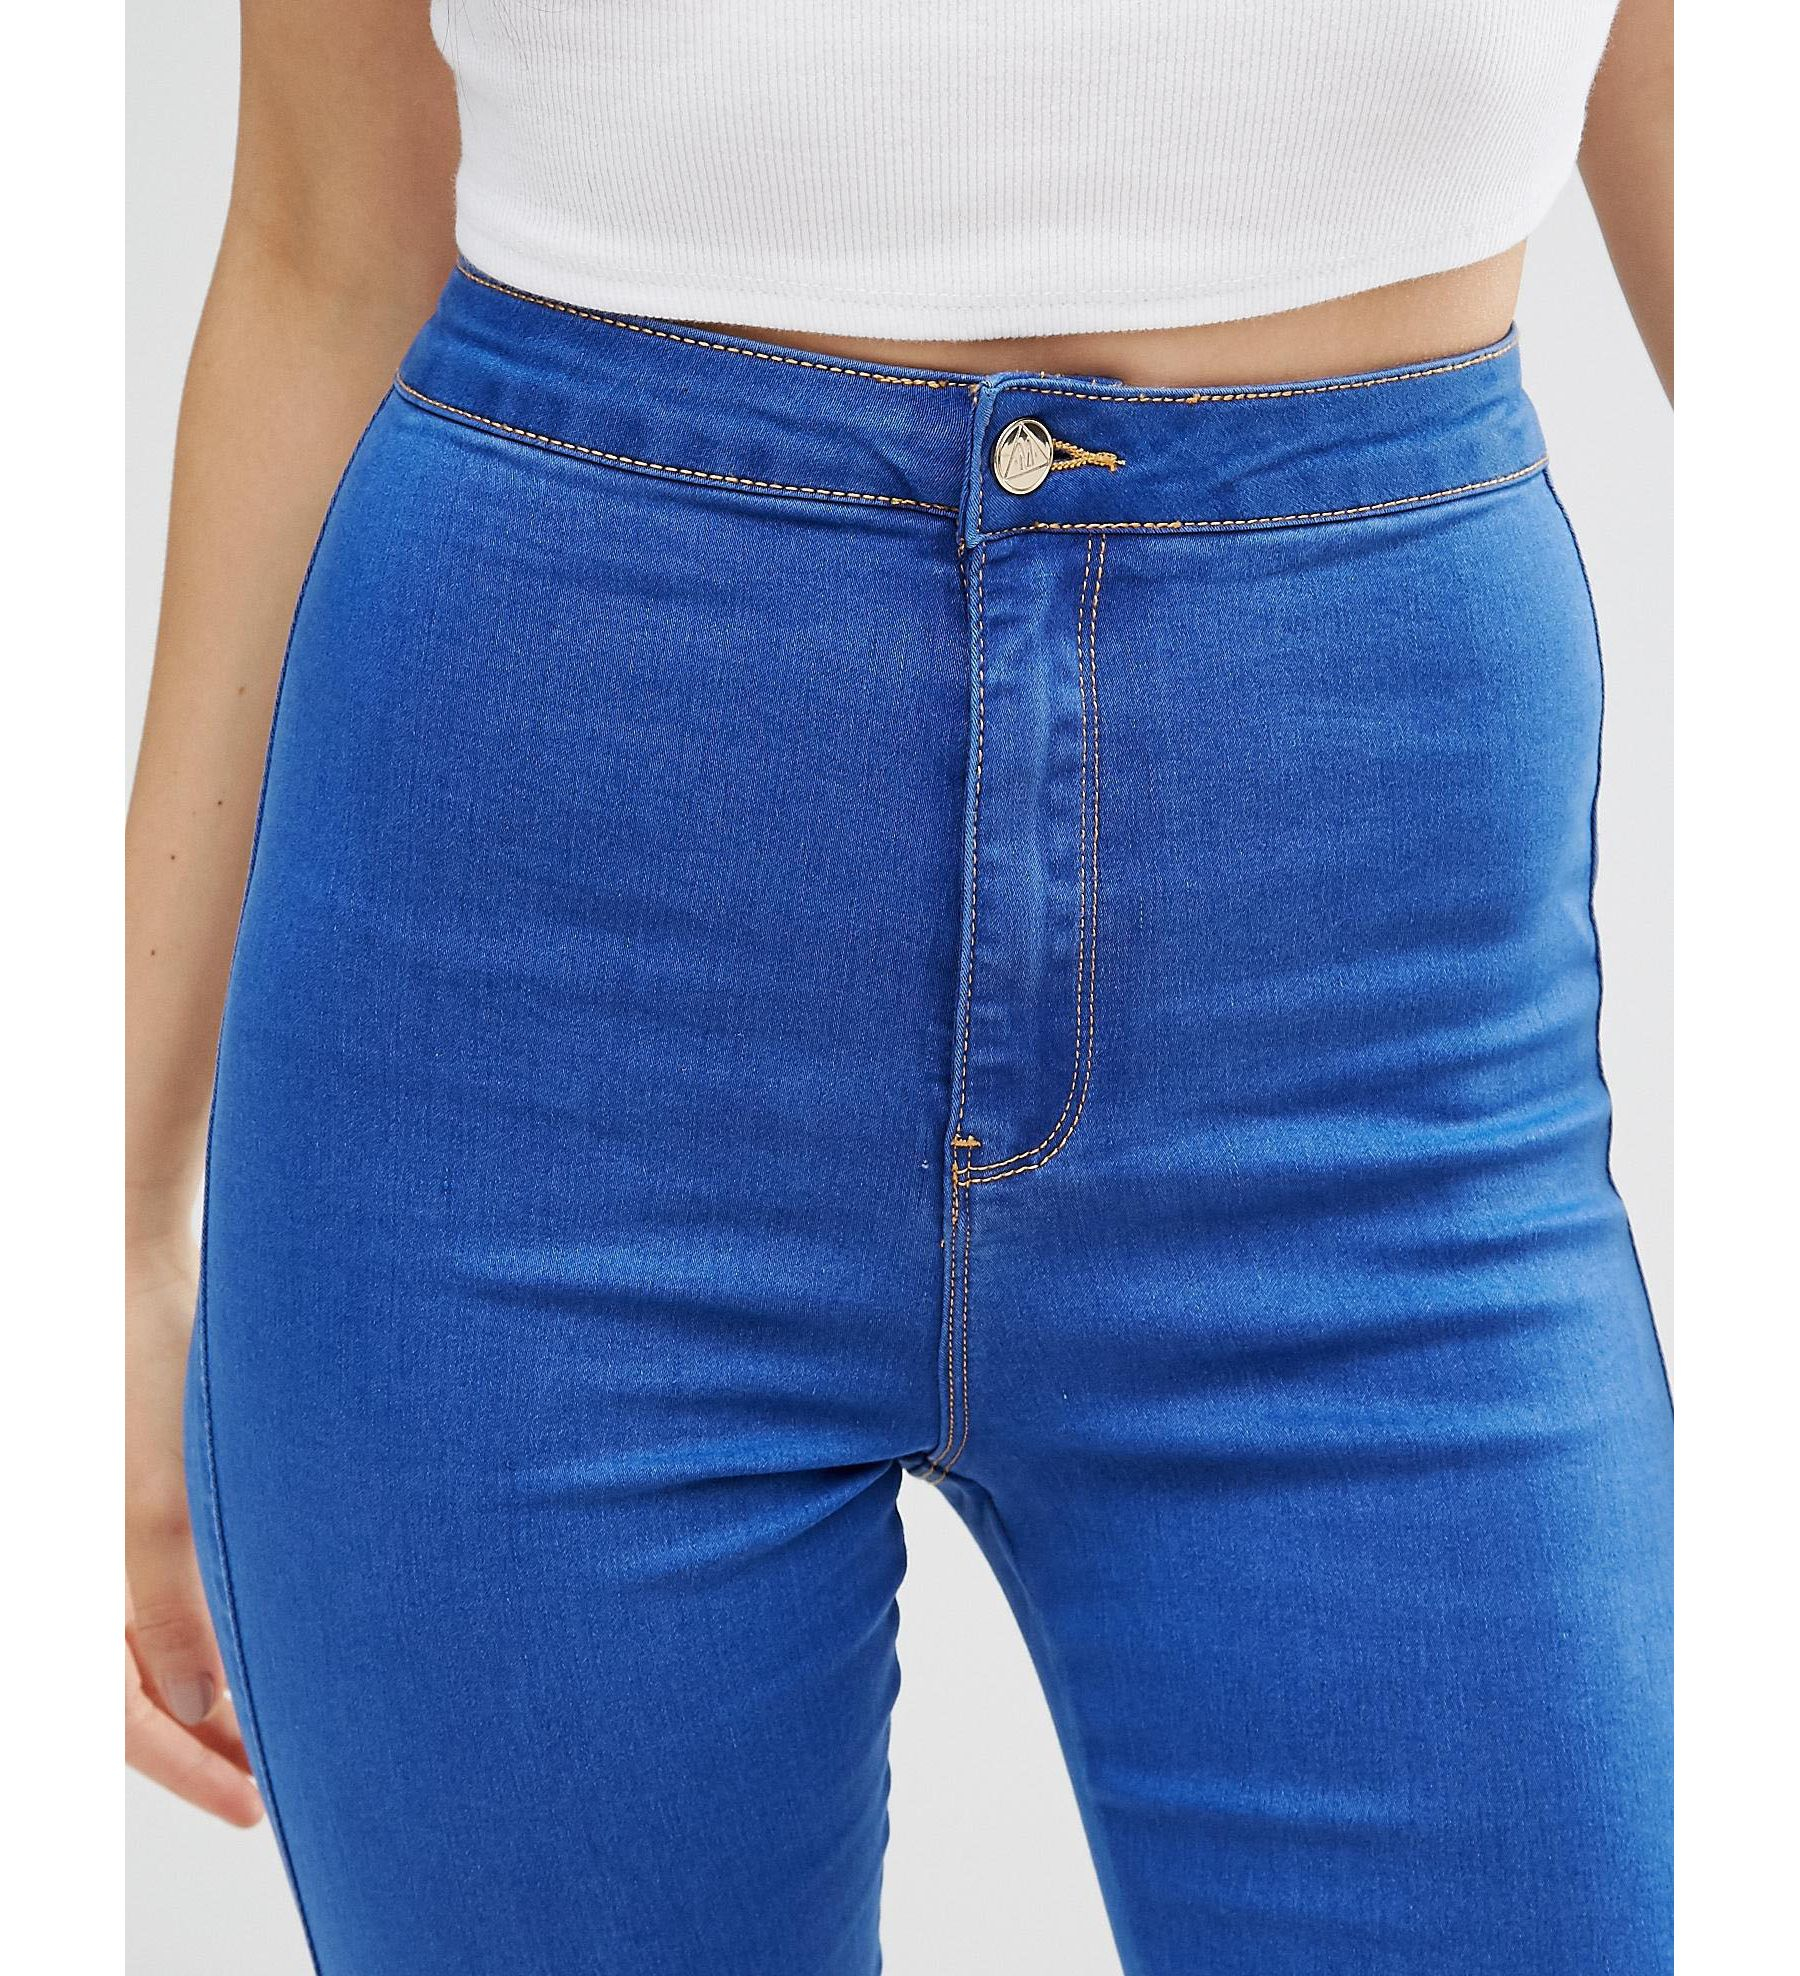 Missguided Vice High Waisted Tube Jean in Blue | Lyst